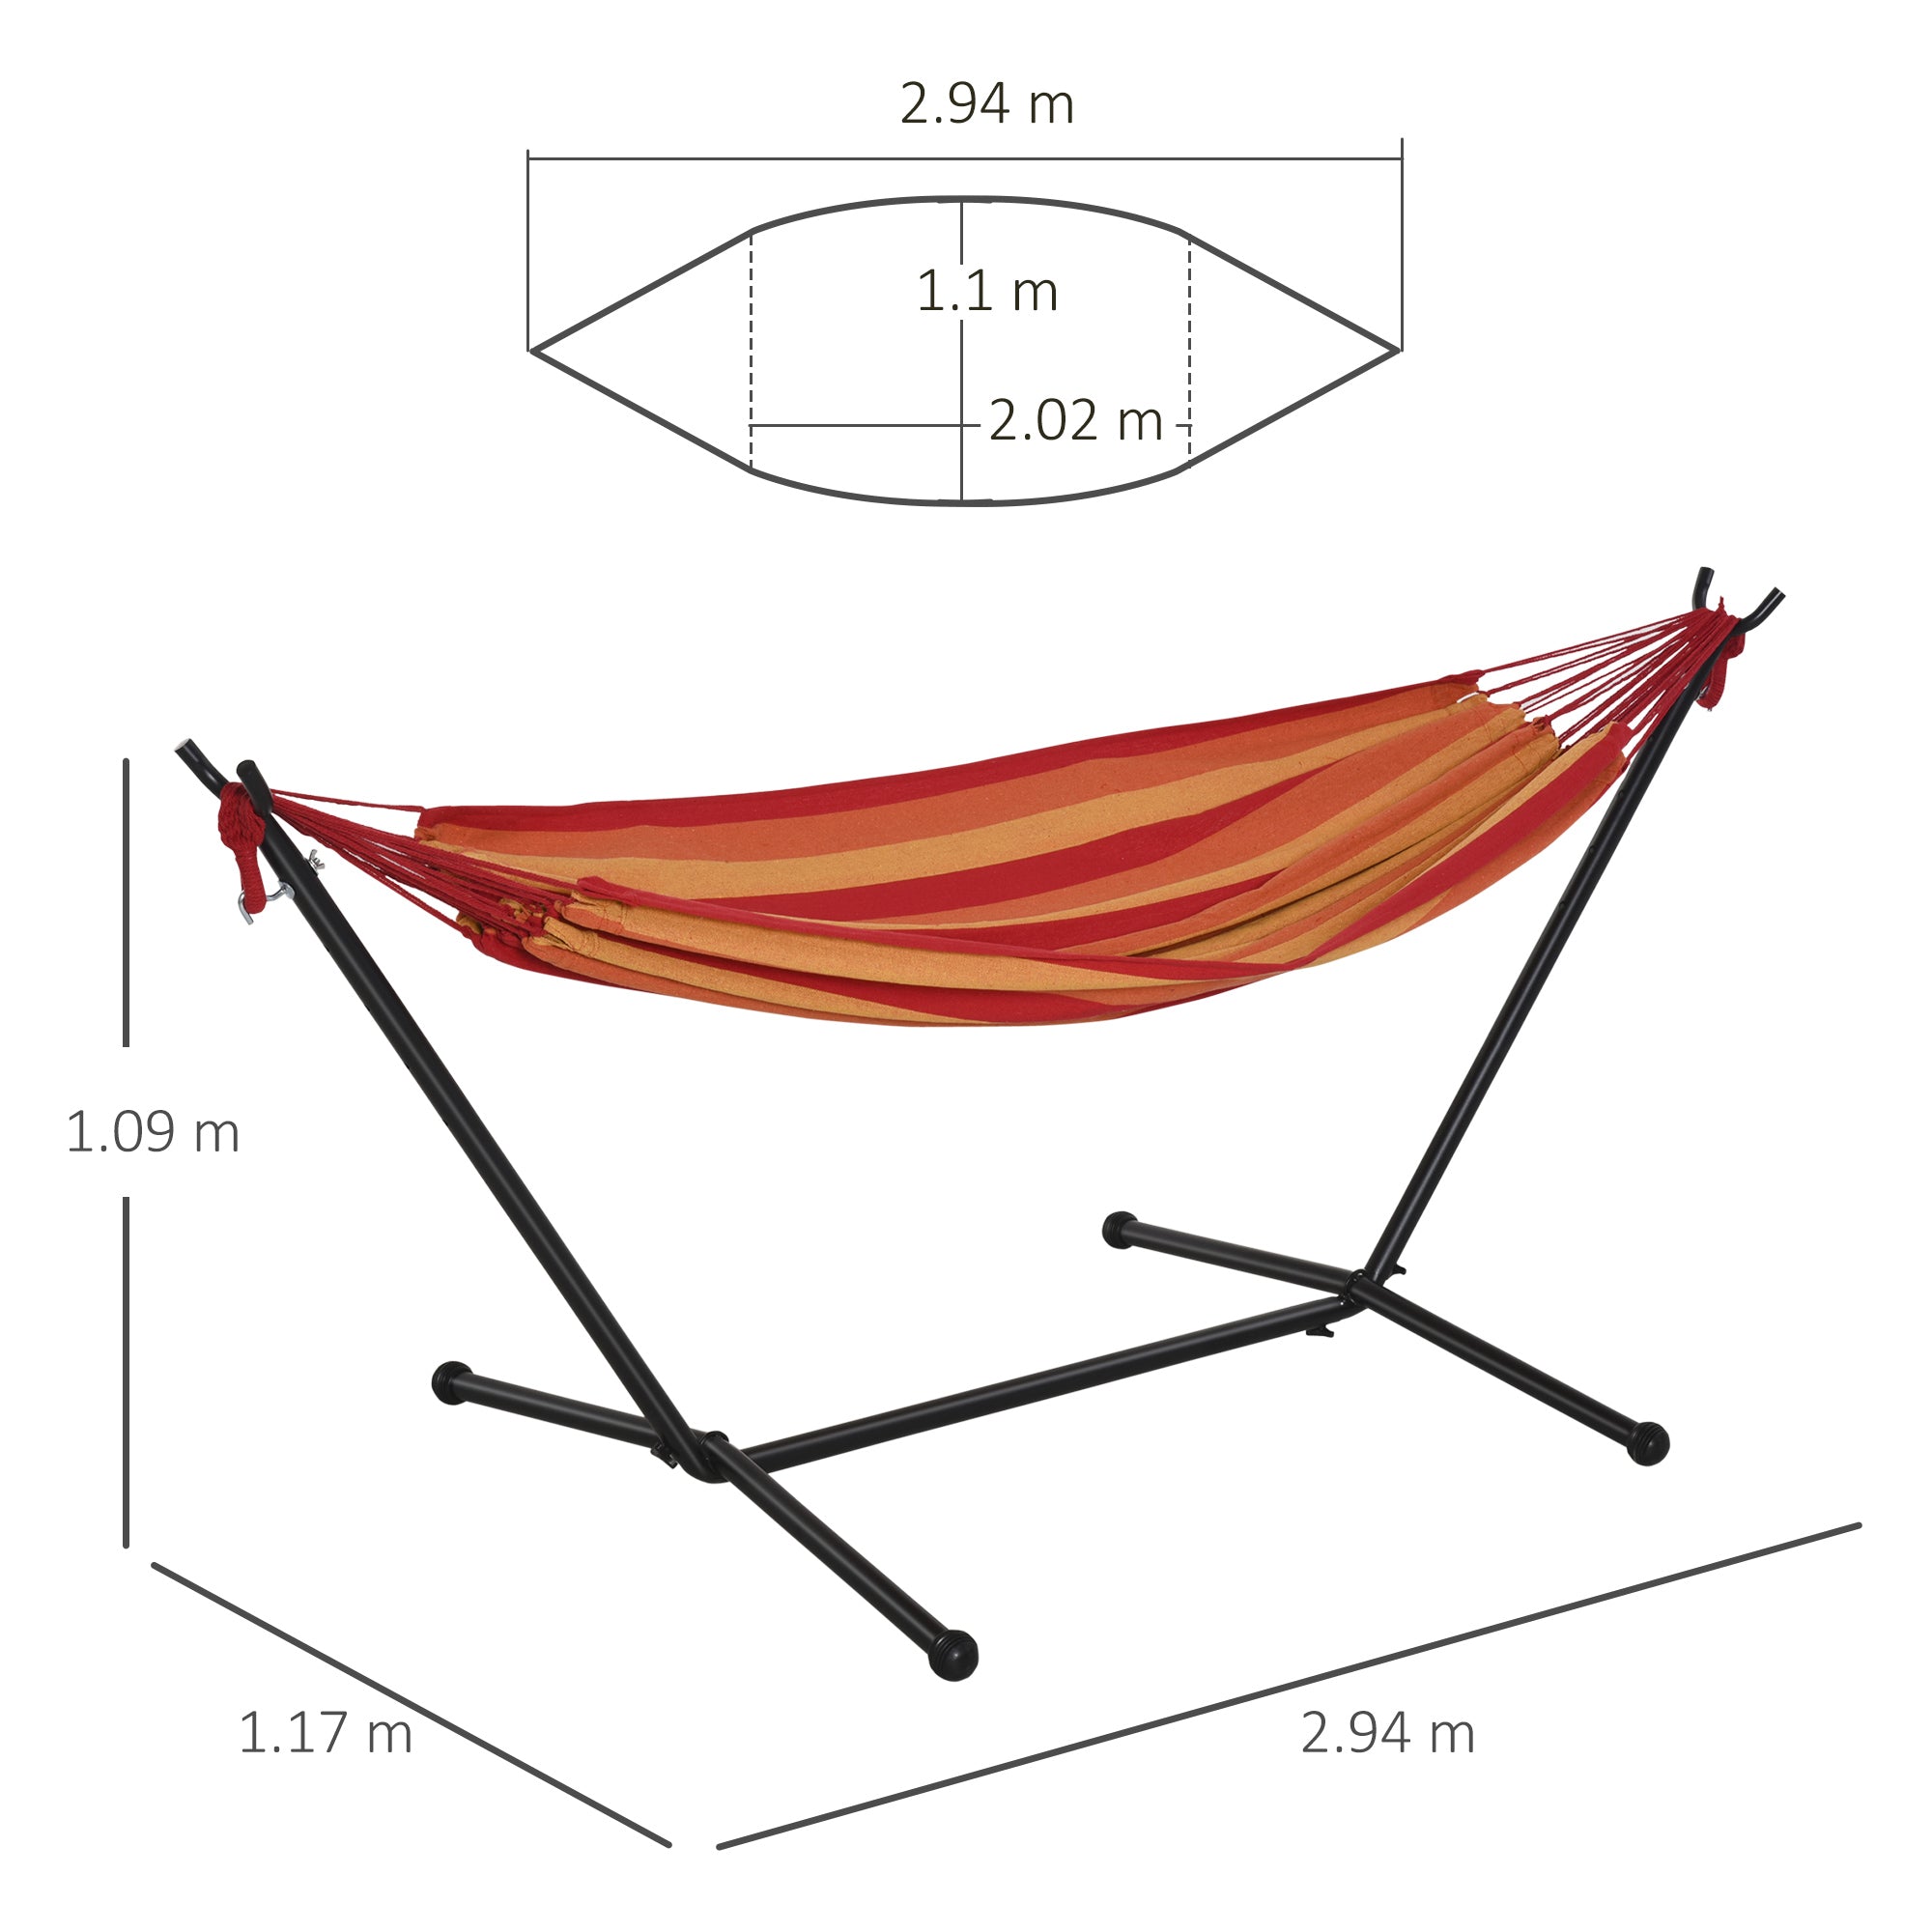 Outsunny 294 x 117cm Hammock with Stand Camping Hammock with Portable Carrying Bag, Adjustable Height, 120kg Load Capacity, Red Stripe - Inspirely